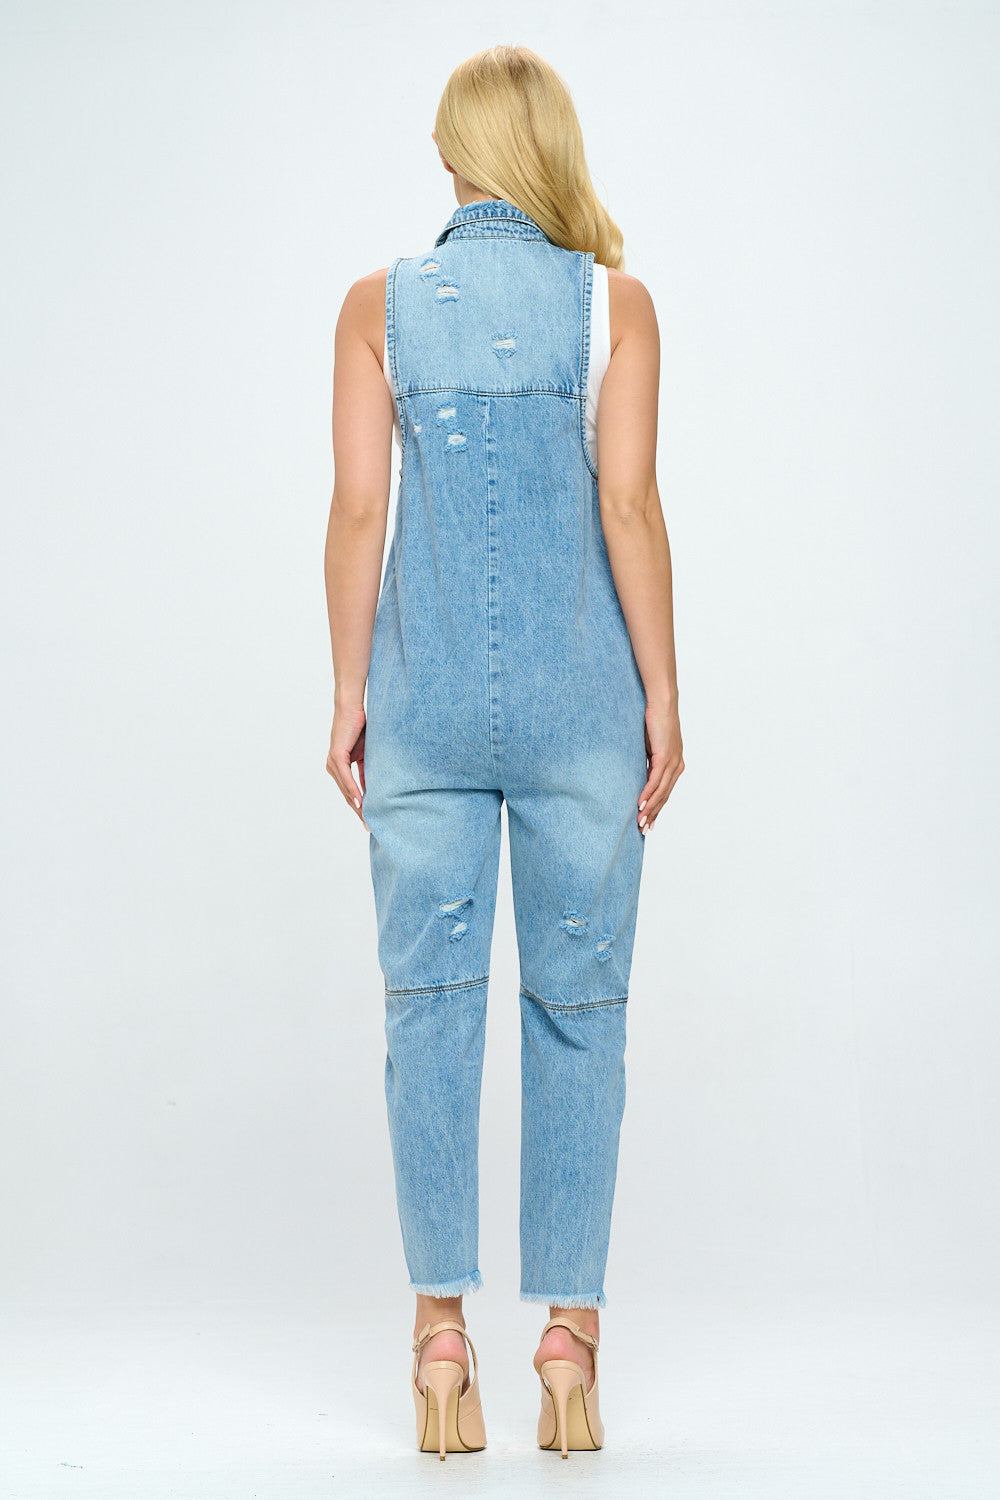 Office Lady Elegant V Neck Denim Strapless Denim Jumpsuit With High Waist  And Patchwork Design Sleeveless And Skinny Flare Romper X0928 From  Liancheng01, $29.57 | DHgate.Com